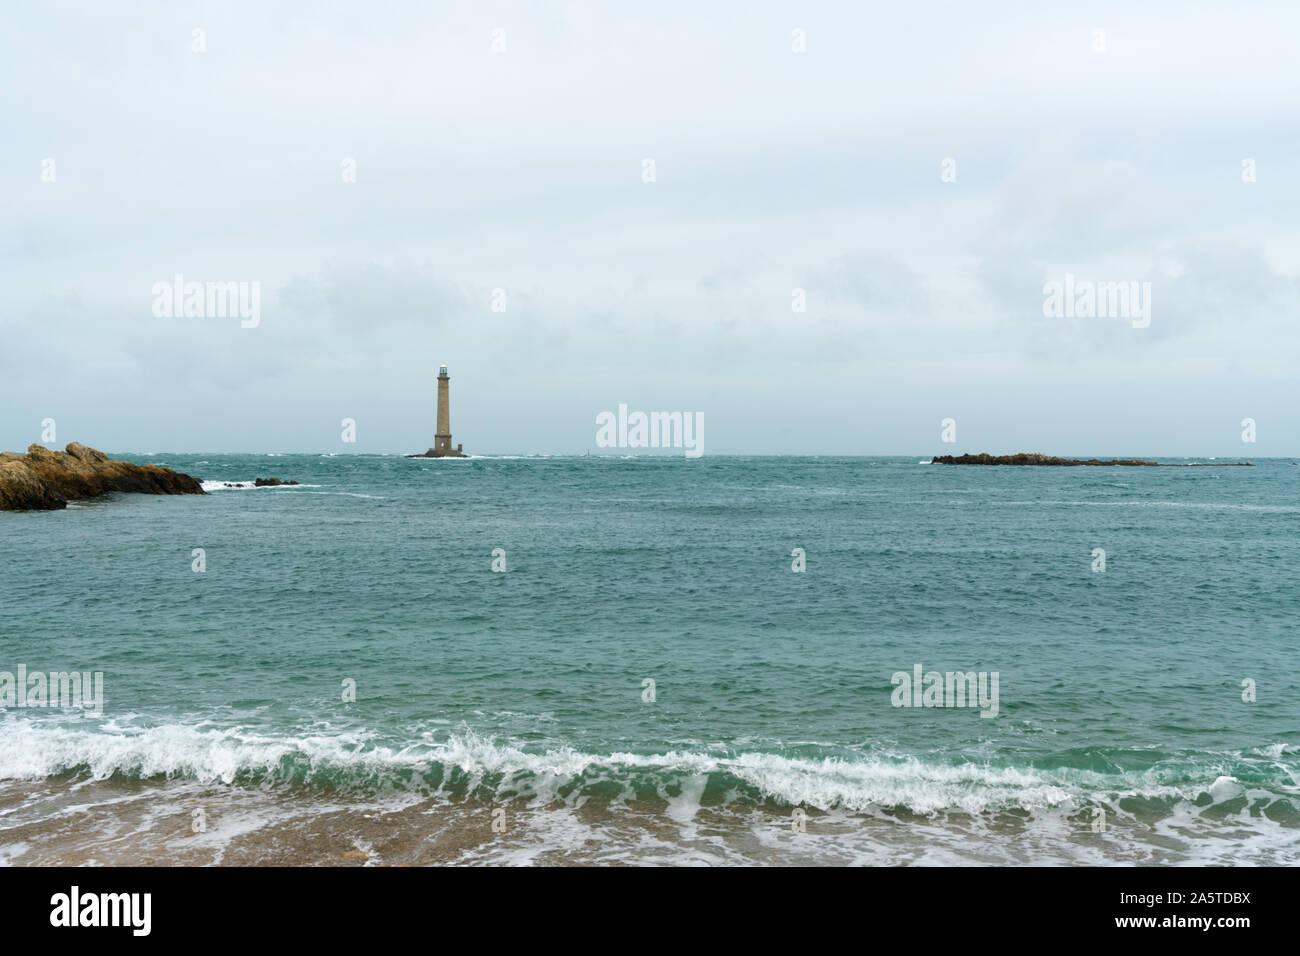 Cap de la Hague, Manche / France - 17 August 2019: view of the Phare de Goury lighthouse on the north coast of Normandy in France Stock Photo